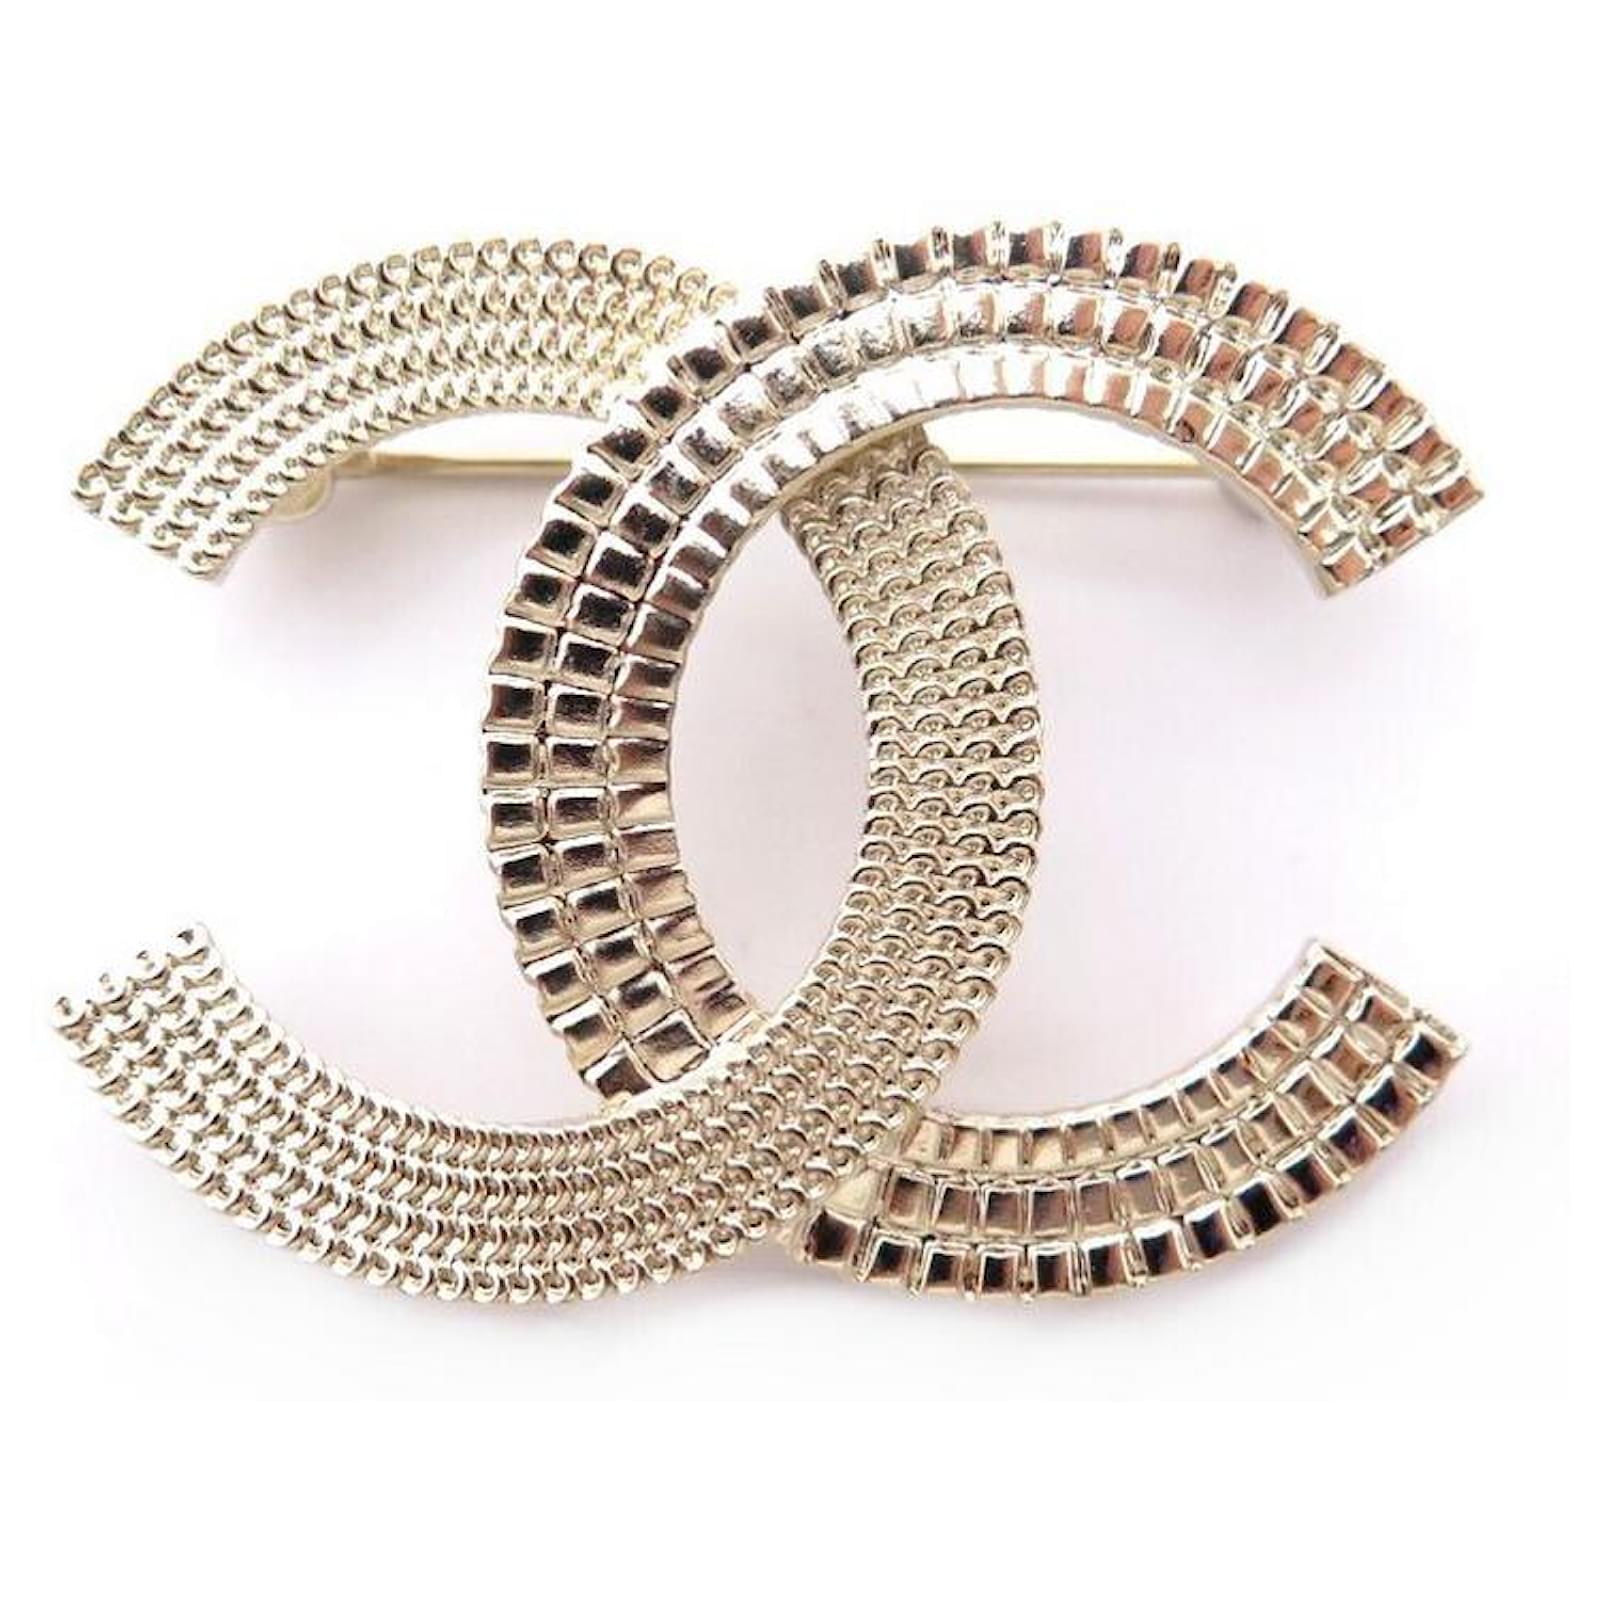 Other jewelry NEW CHANEL LOGO CC BROOCH IN GOLD METAL GUILLOCHE